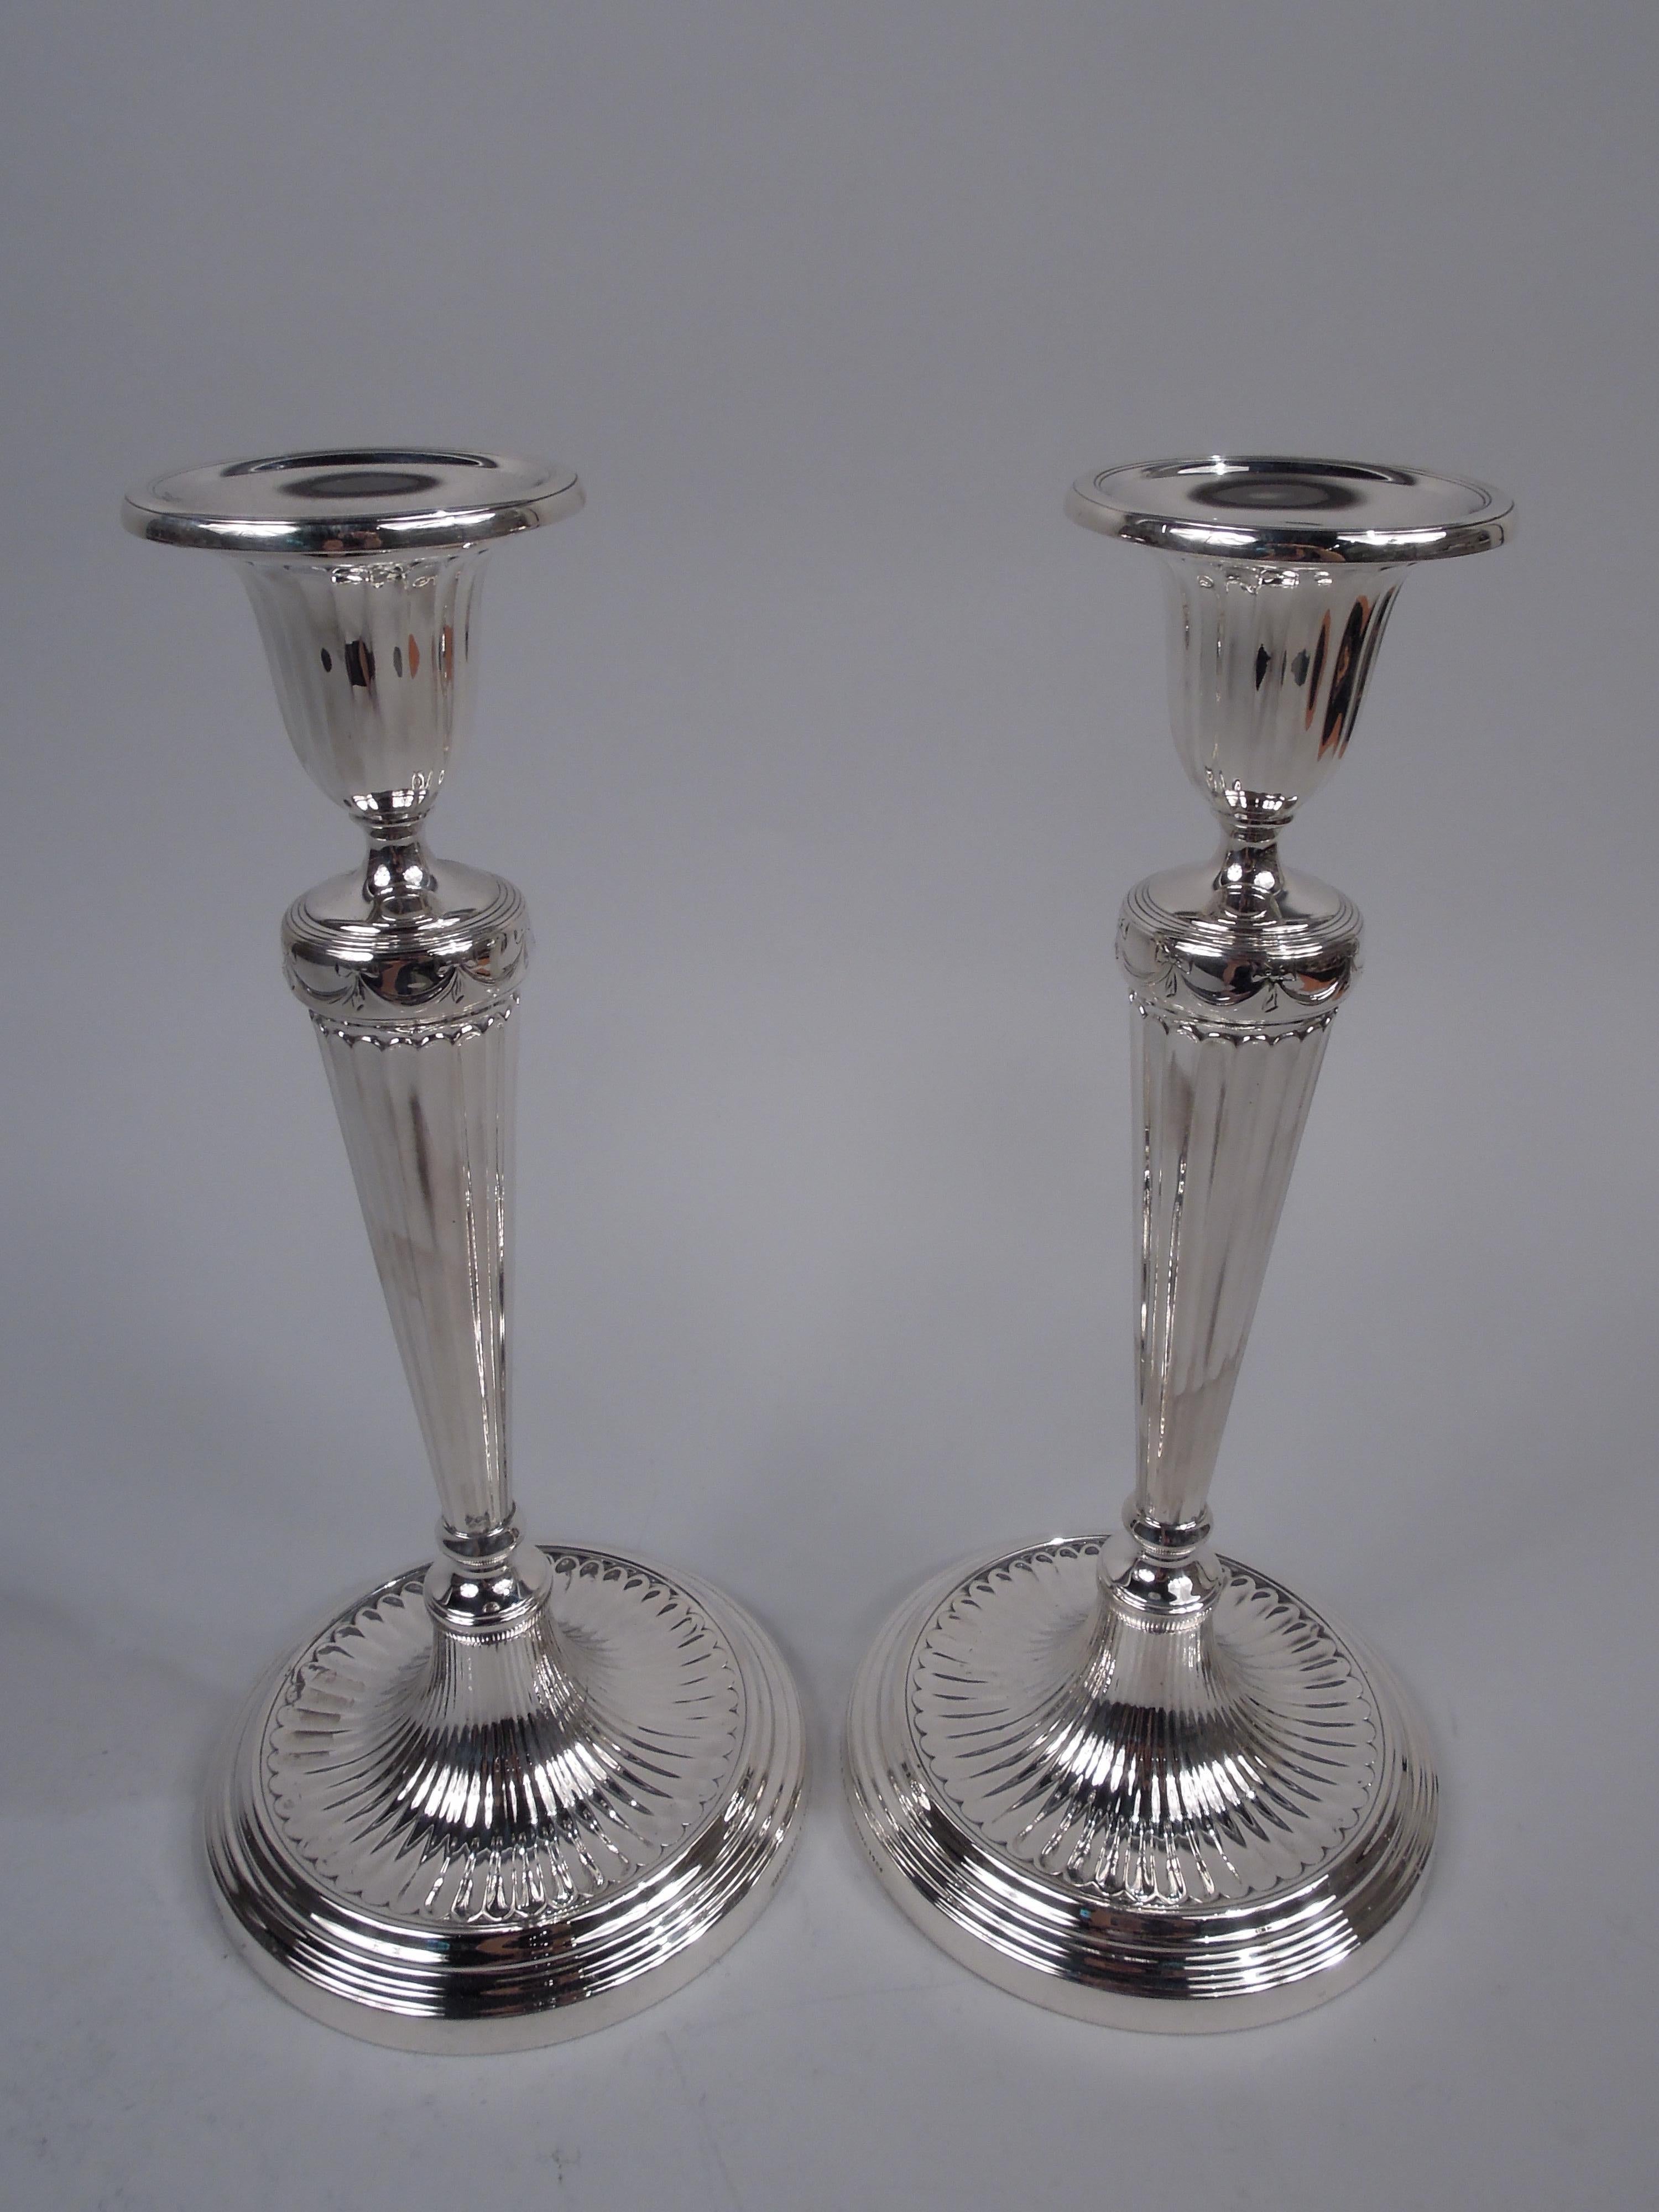 Pair of English Neoclassical sterling silver candlesticks. Made by Tiffany & Co. in New York, ca 1916. Each: Tapering column on dome flowing into stepped and concave base. Tapering socket with detachable bobeche. Ribboned swags. Fine fluting that